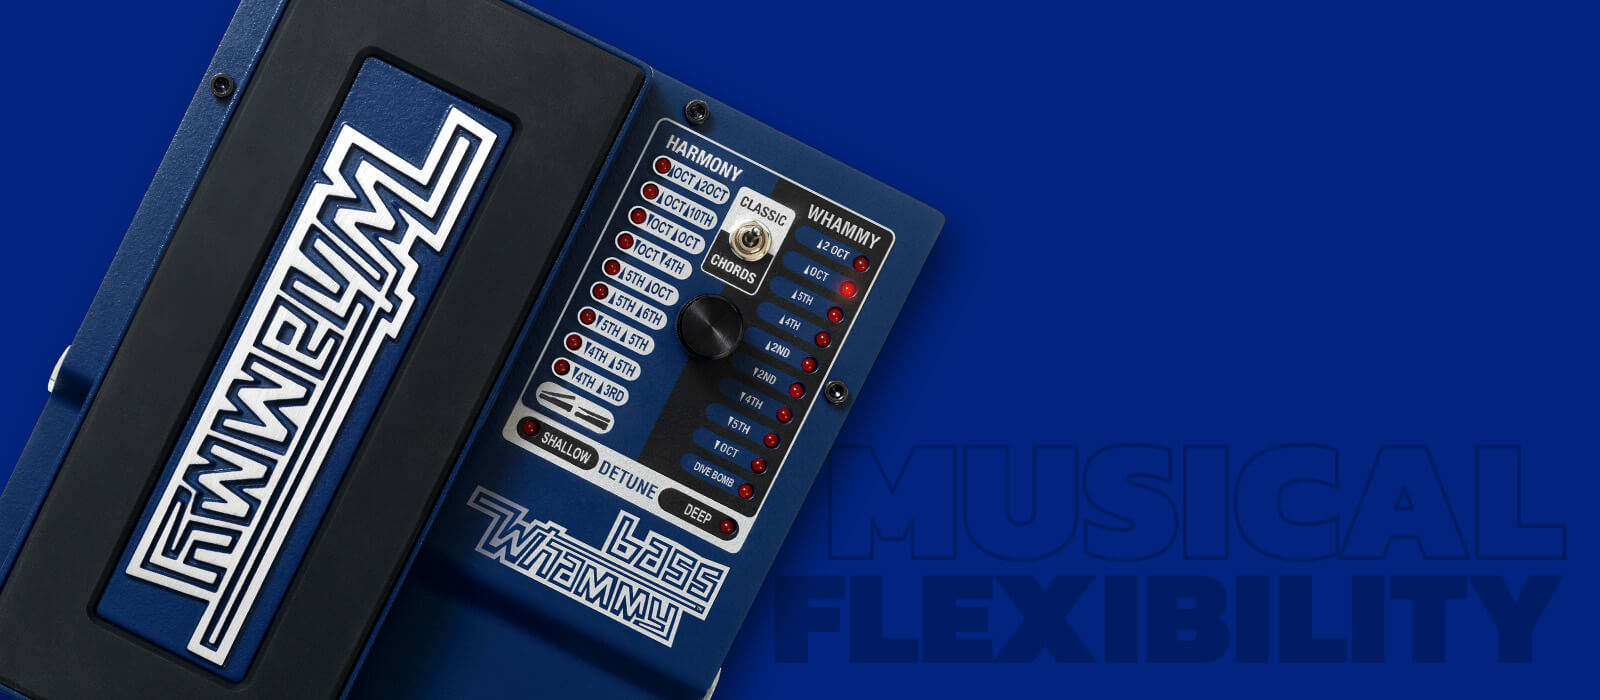 DigiTech Bass Whammy pitch shifting effect pedal top in blue with blue background and graphics that says 